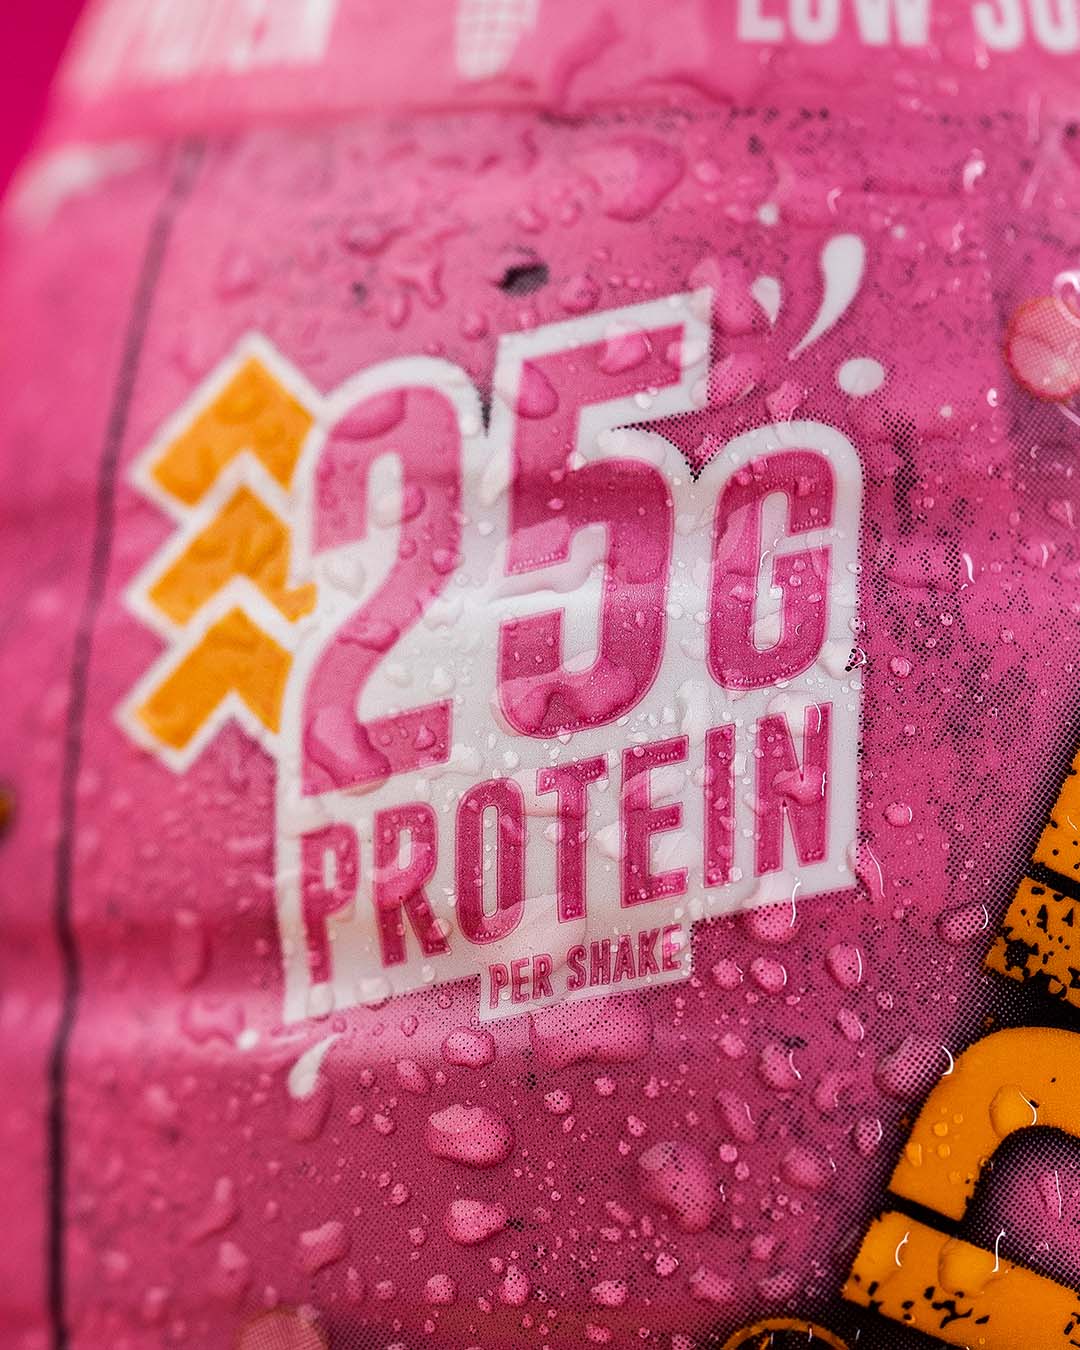 Label text "25g Protein Per Shake"